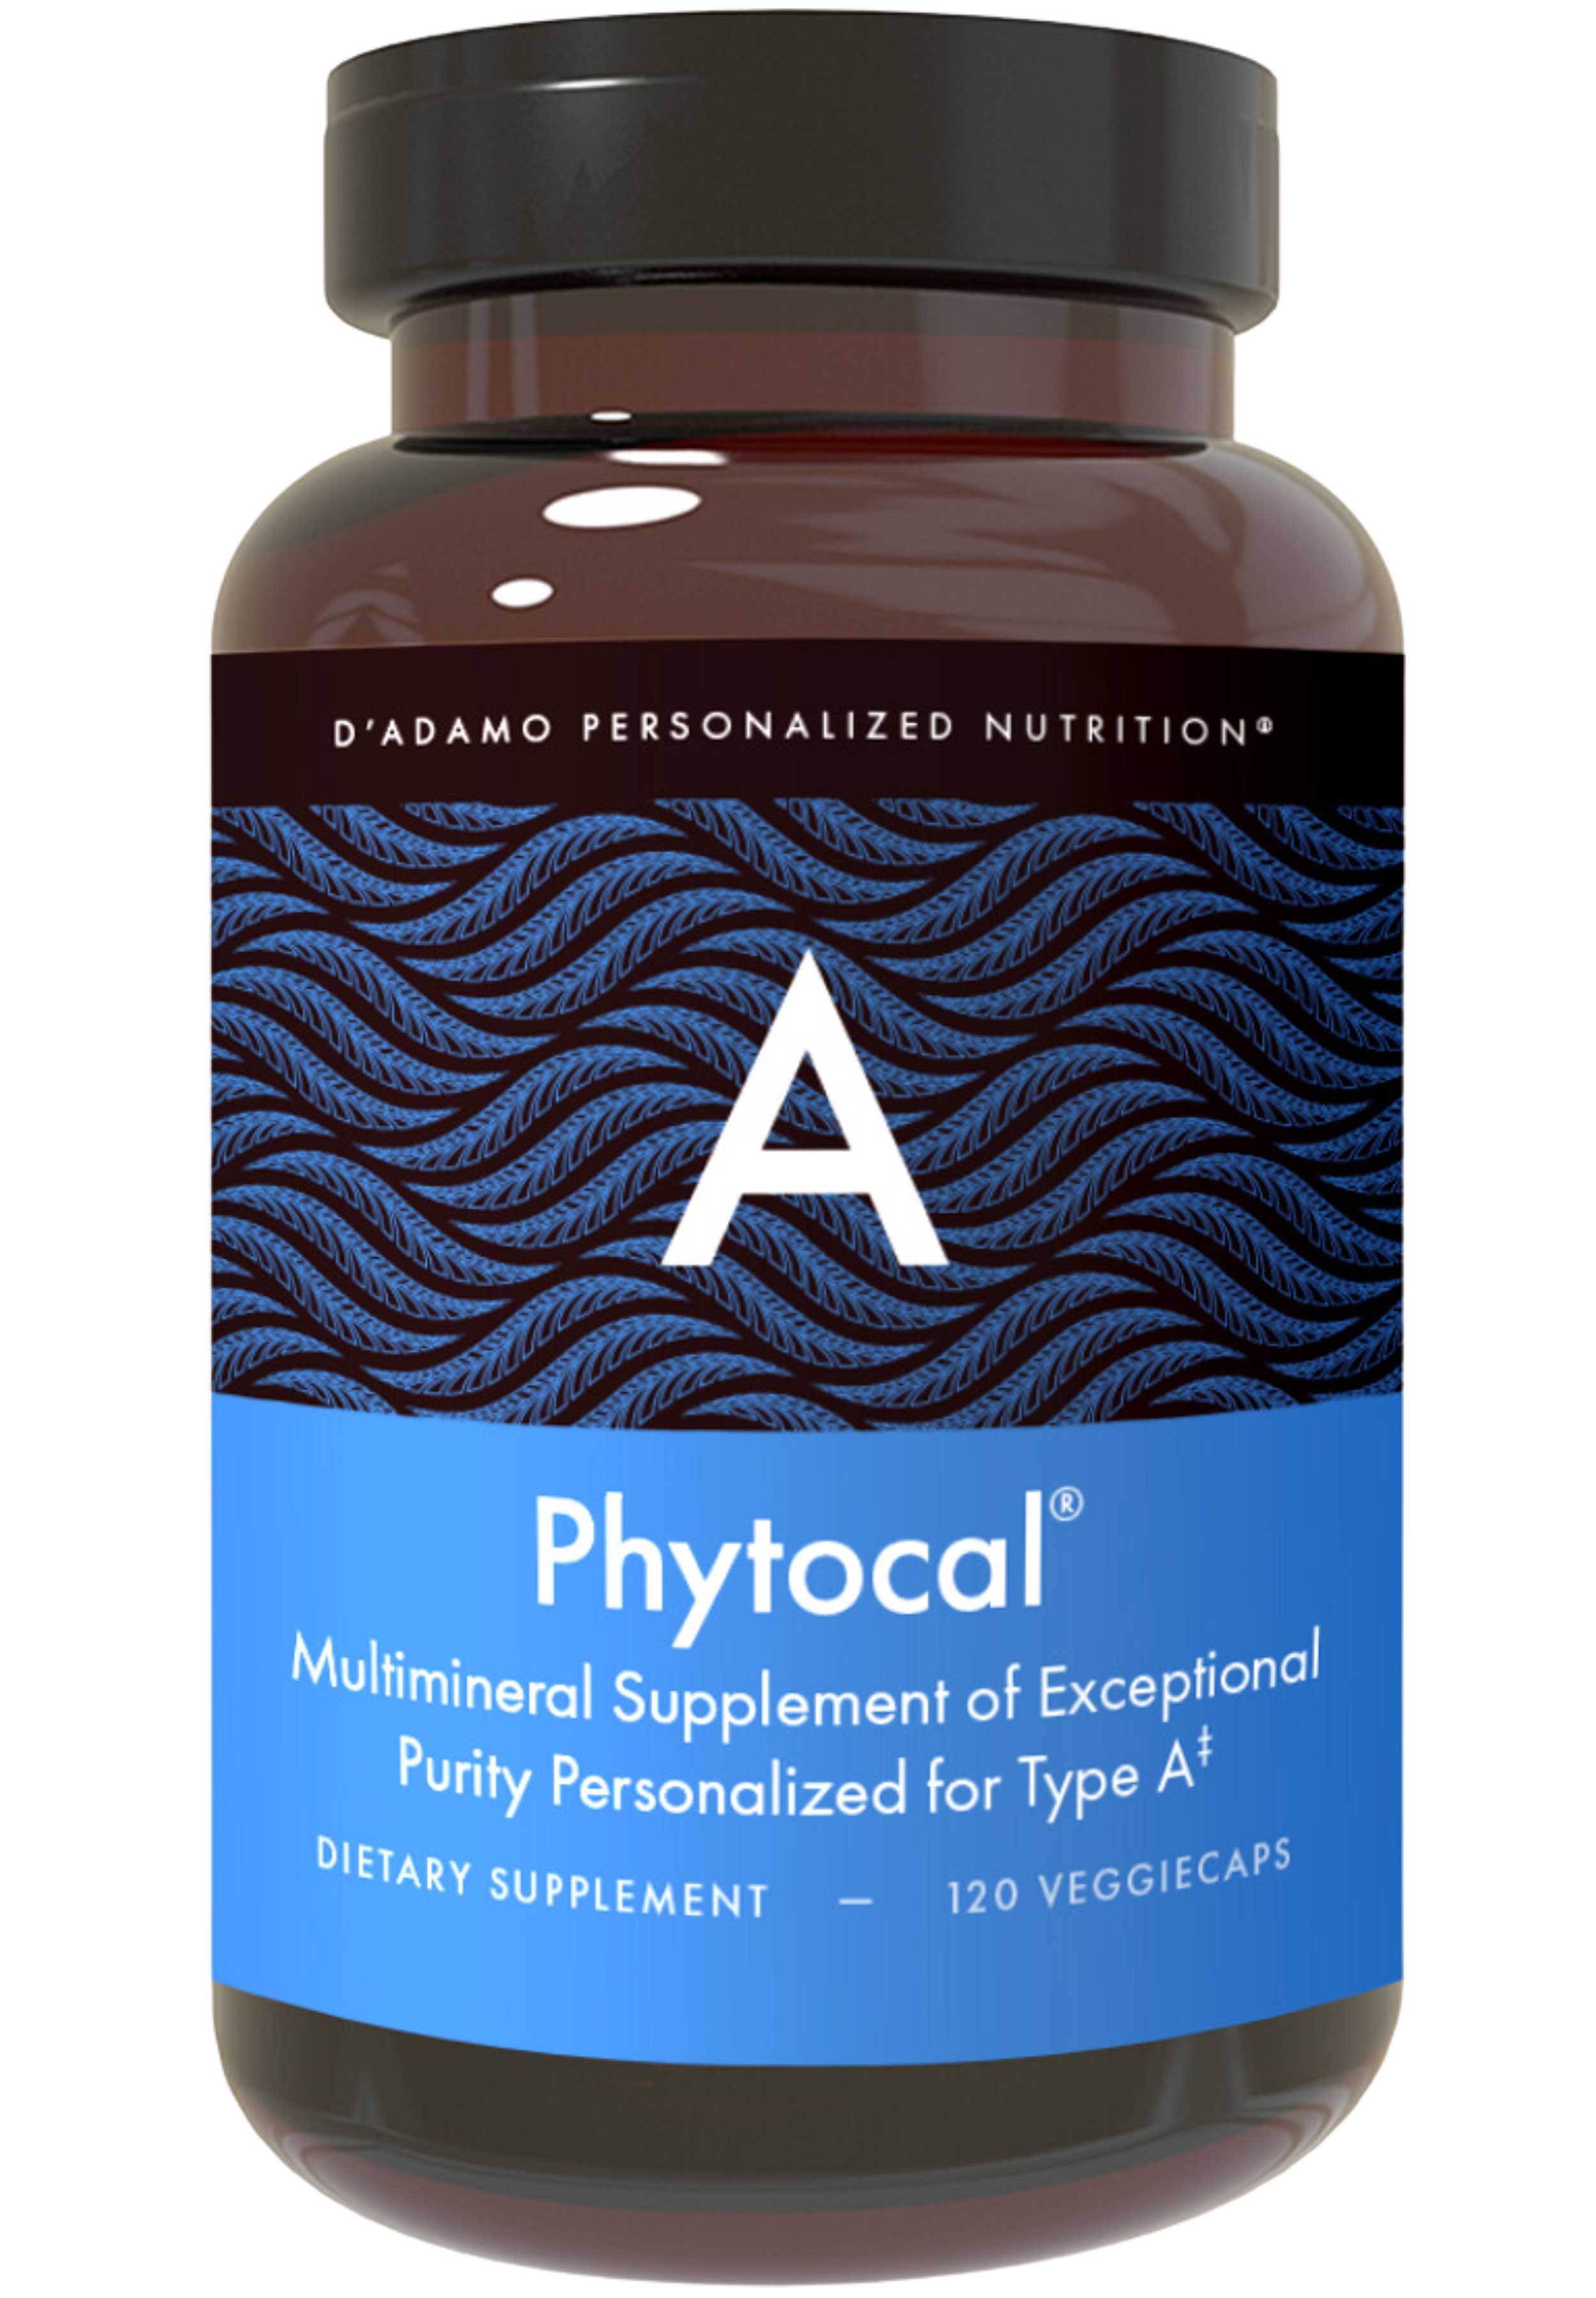 D'Adamo Personalized Nutrition Phytocal A